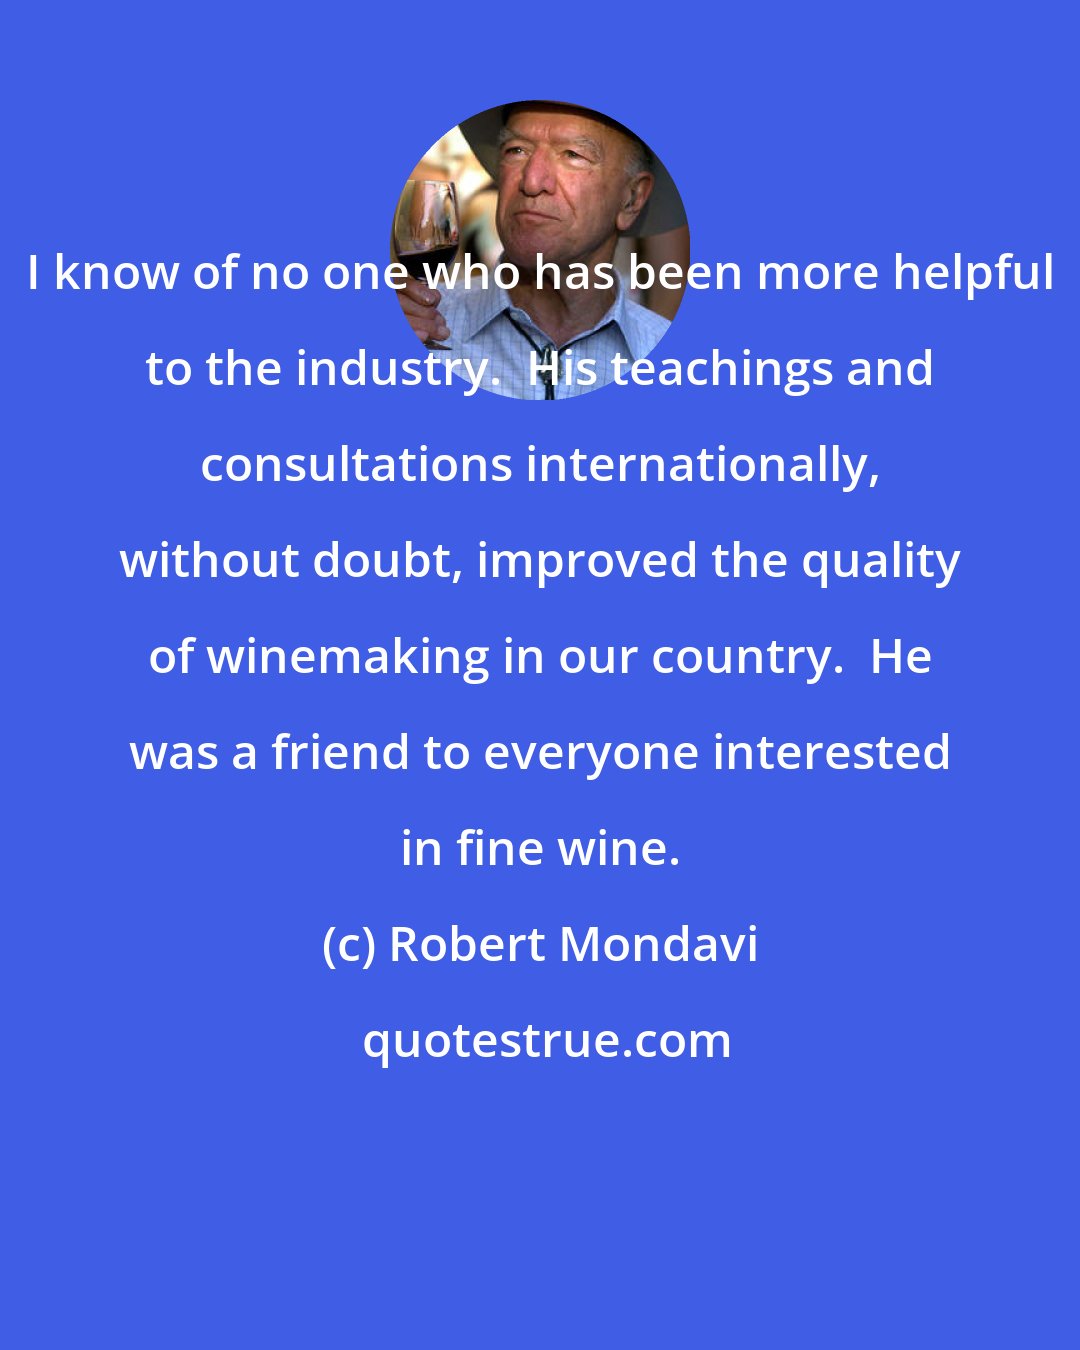 Robert Mondavi: I know of no one who has been more helpful to the industry.  His teachings and consultations internationally, without doubt, improved the quality of winemaking in our country.  He was a friend to everyone interested in fine wine.